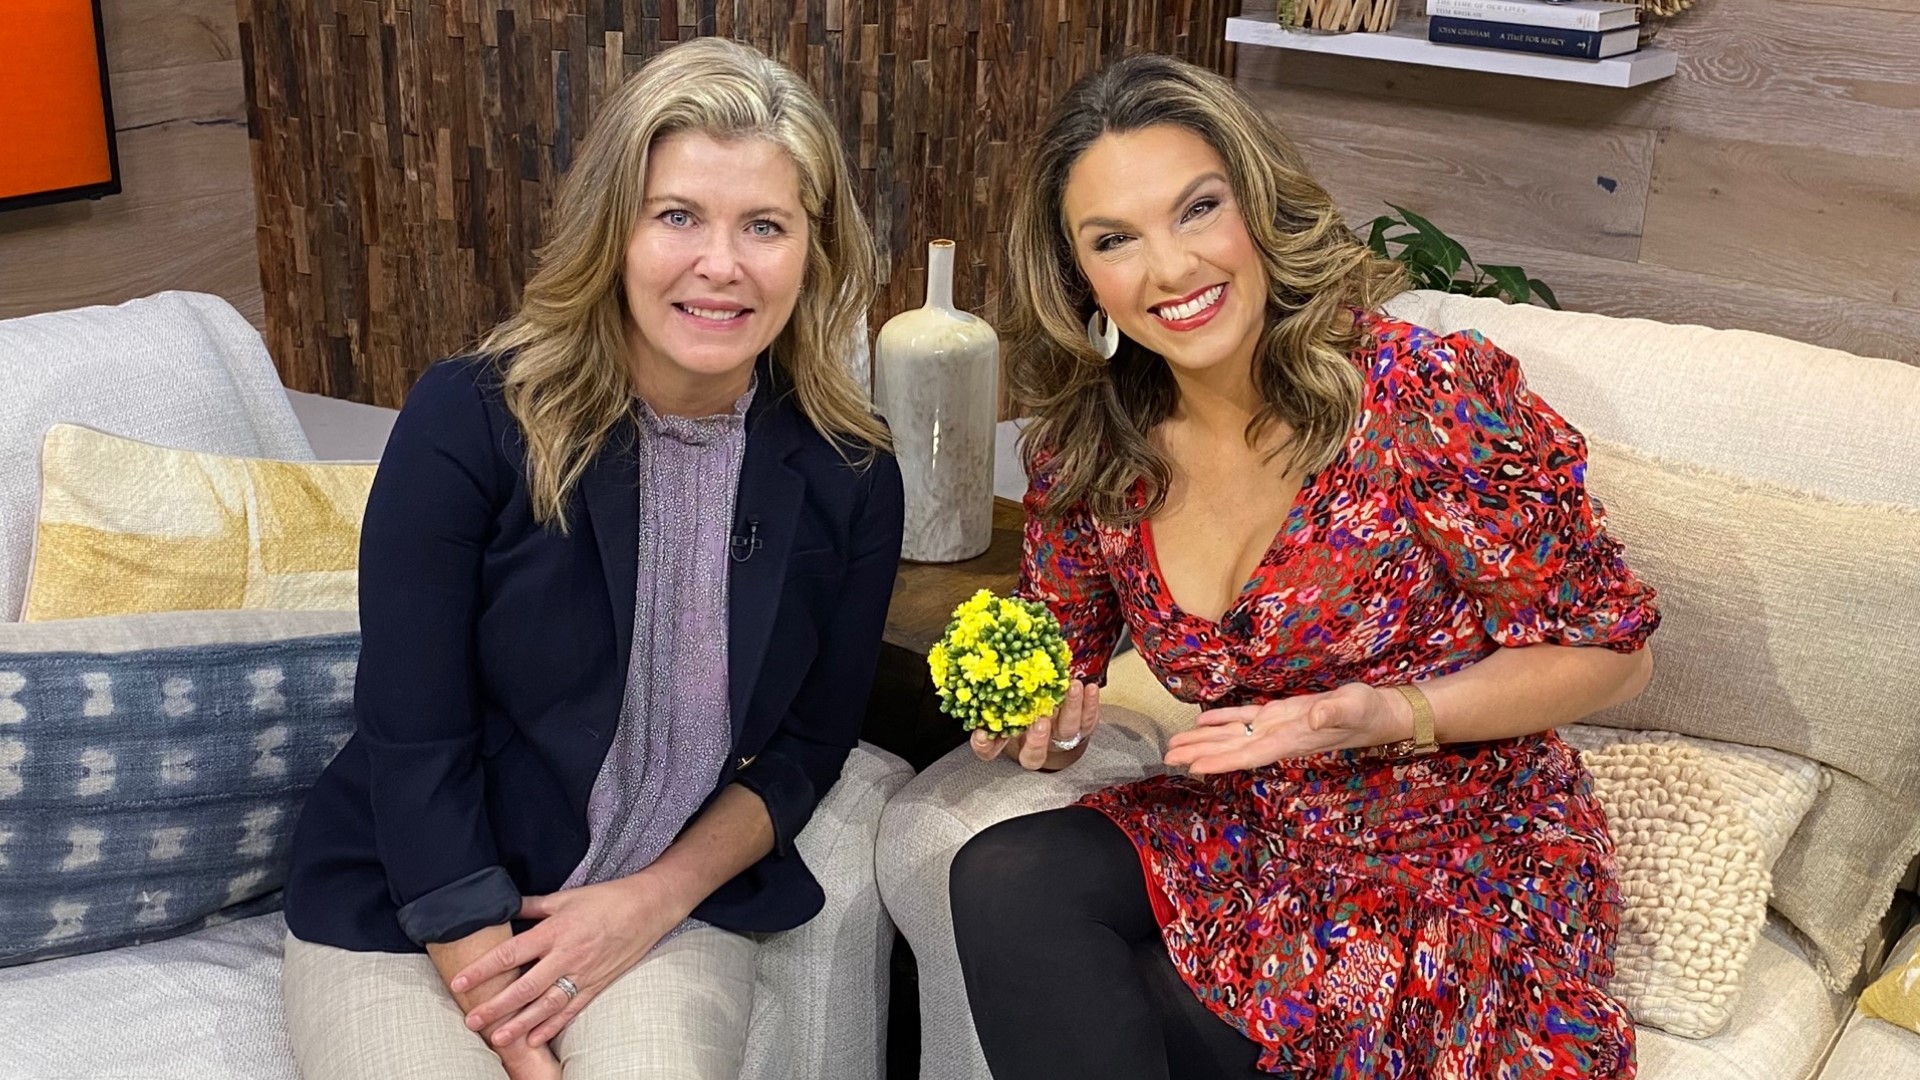 Dr. Jennifer Heydt joined the show to give us some insight into the difference between allergy symptoms and more serious illnesses. Sponsored by EvergreenHealth.